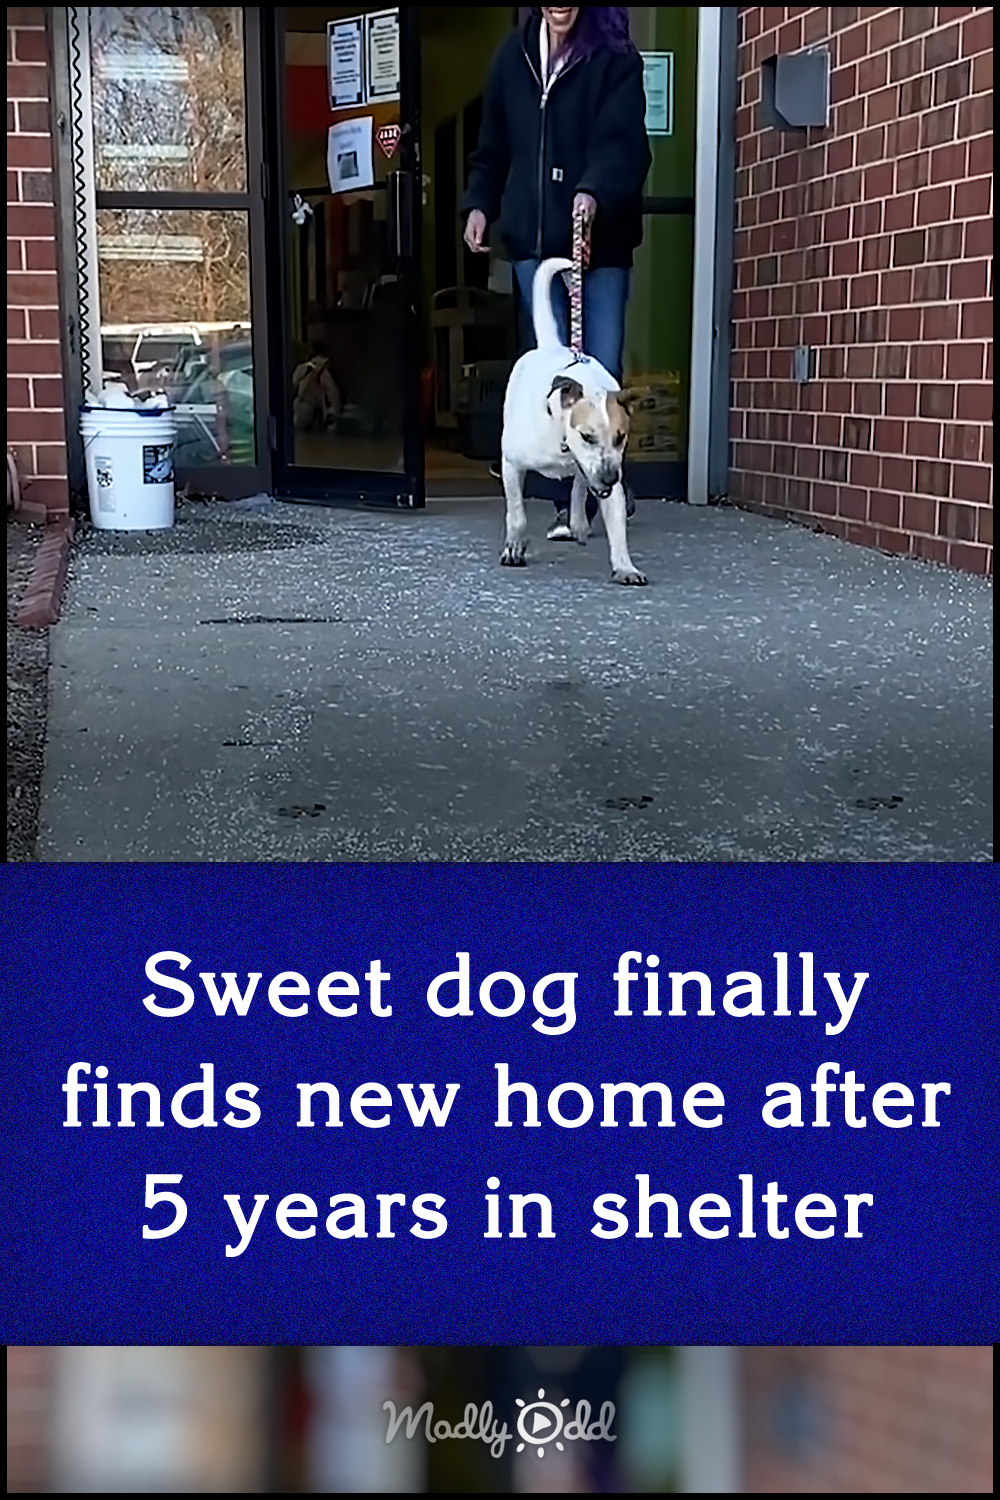 Sweet dog finally finds new home after 5 years in shelter